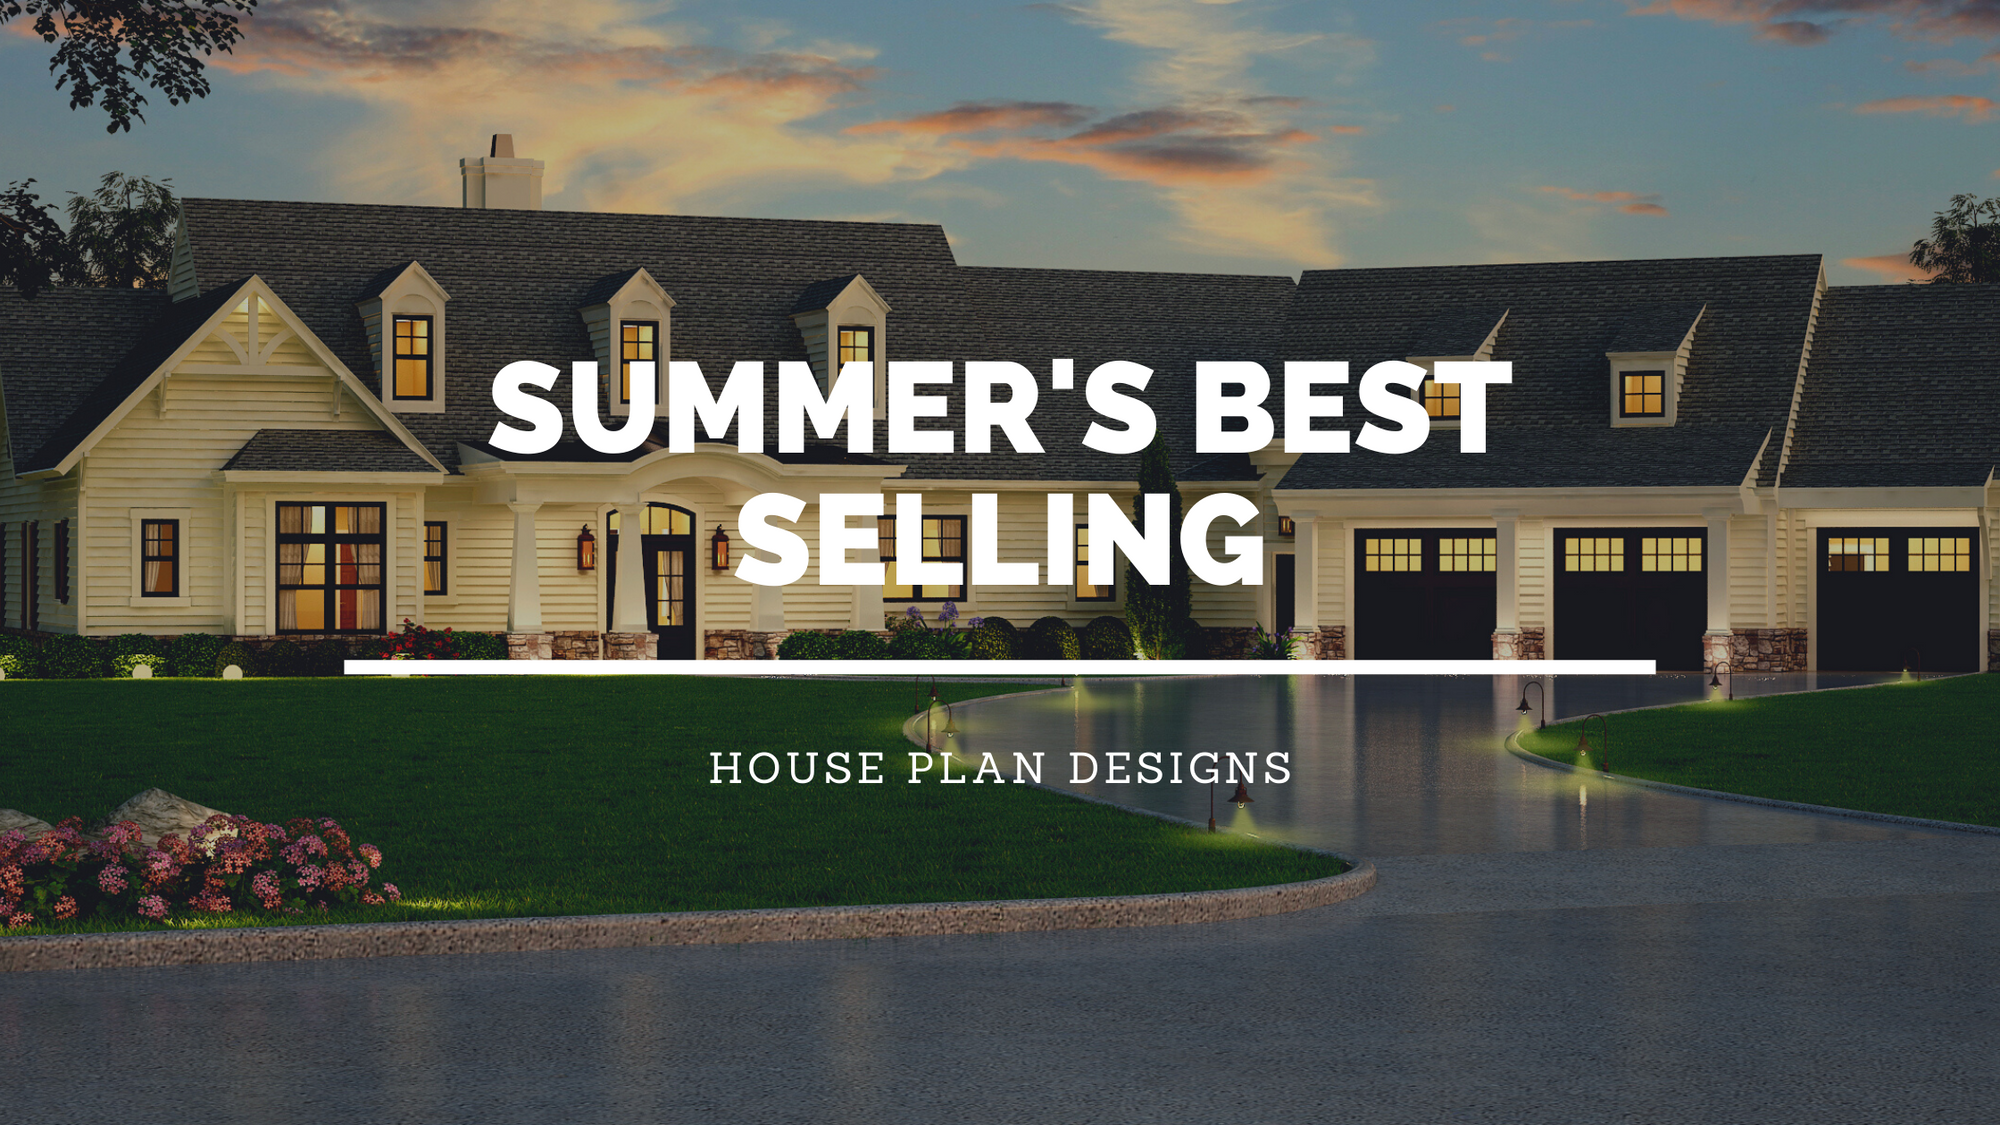 Summer's Best Selling House Plans